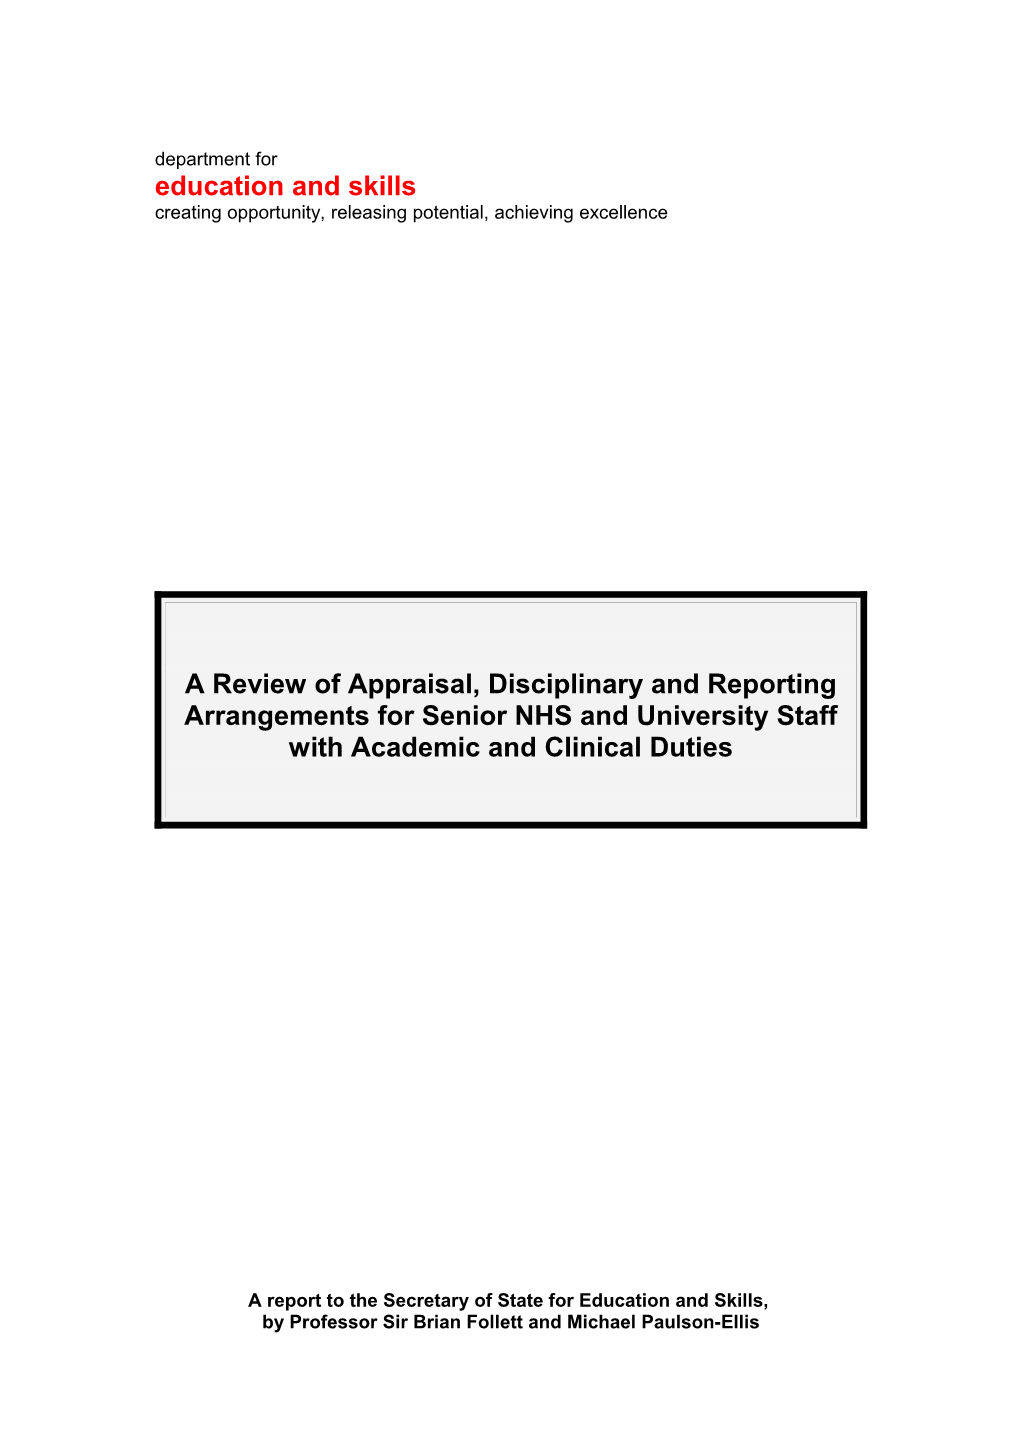 Review Of Appraisal, Disciplinary And Reporting Arrangements For Senior Nhs And University Staff With Academic And Clinical Du